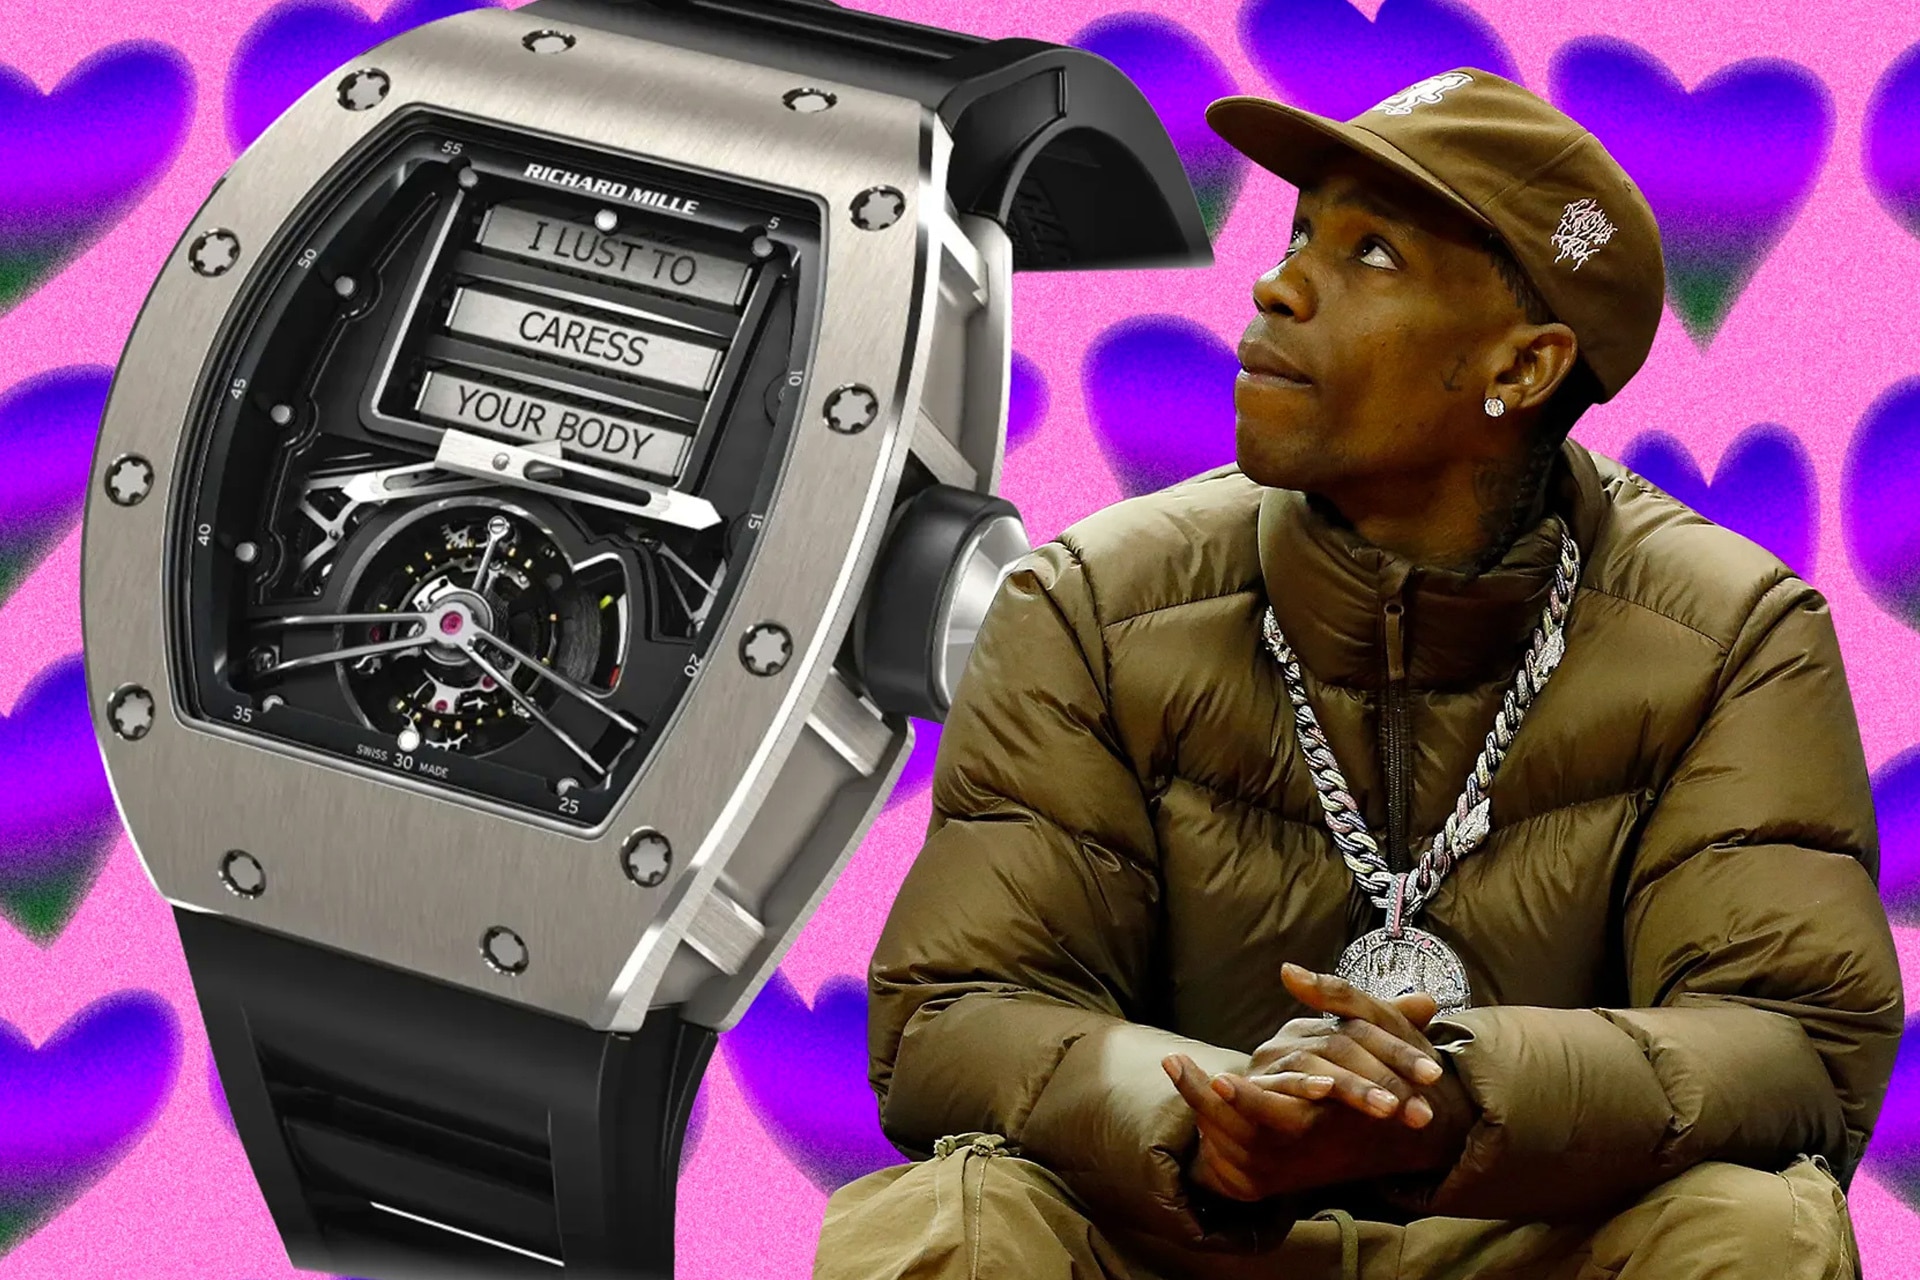 Watch up the this. Часы Тревис Трэвис Скотт. Ришар Милле. Richard Mille RM 69.